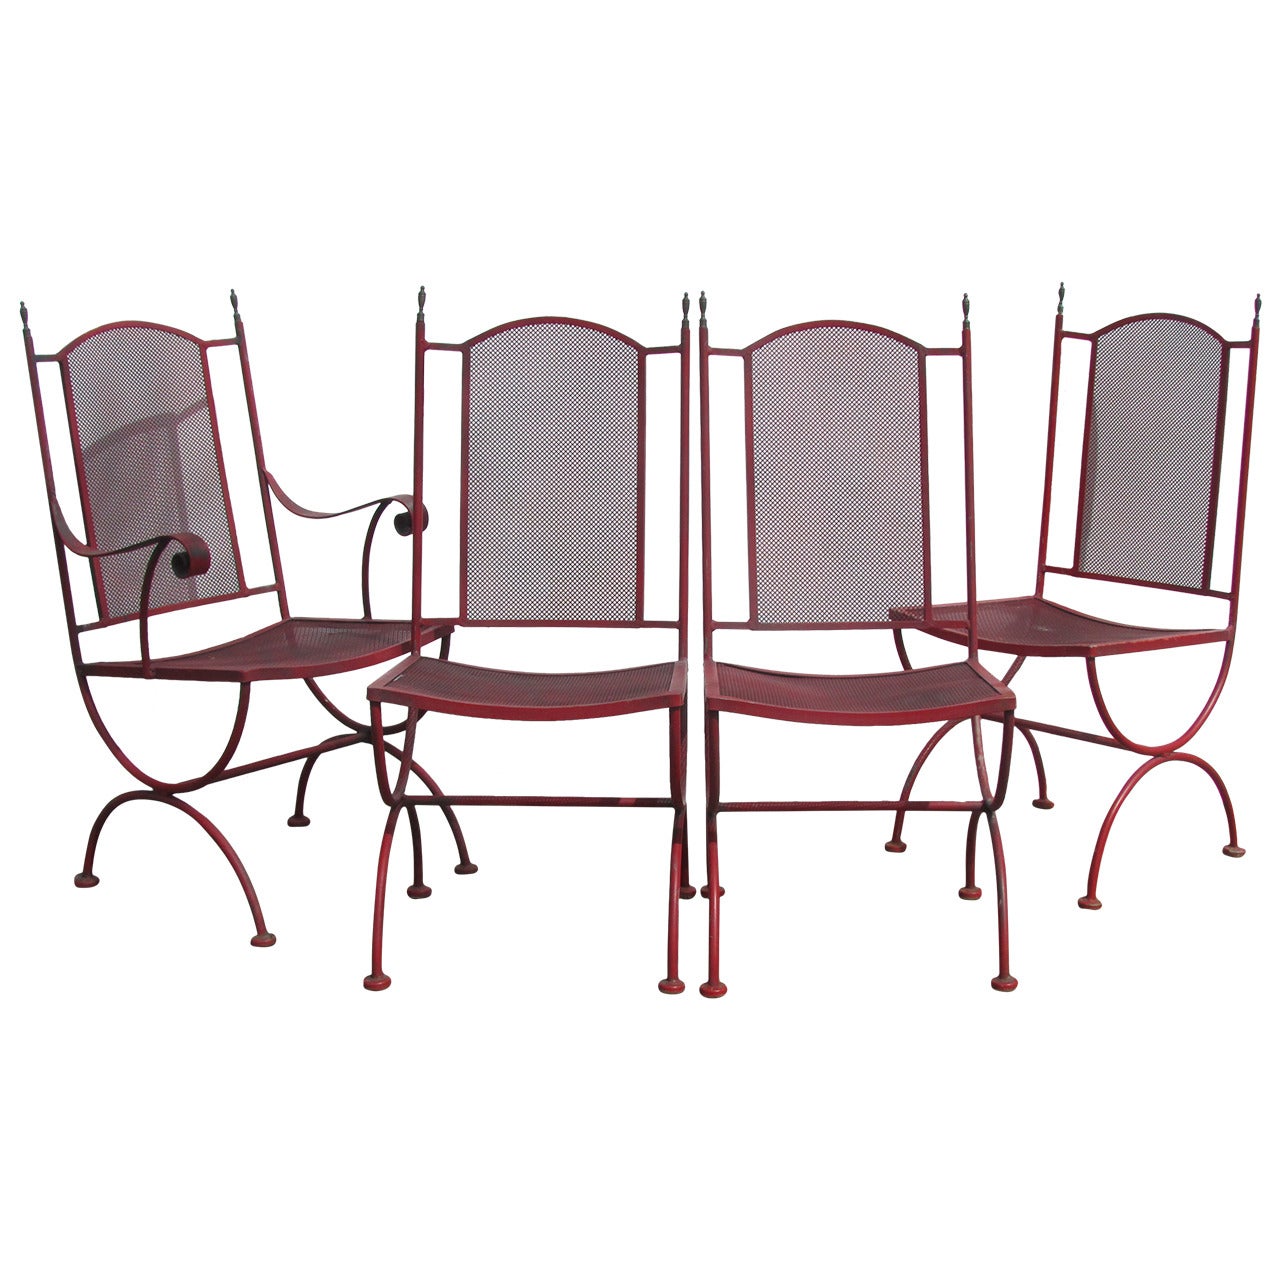 Classical Regency Style Iron and Brass Curule Chairs